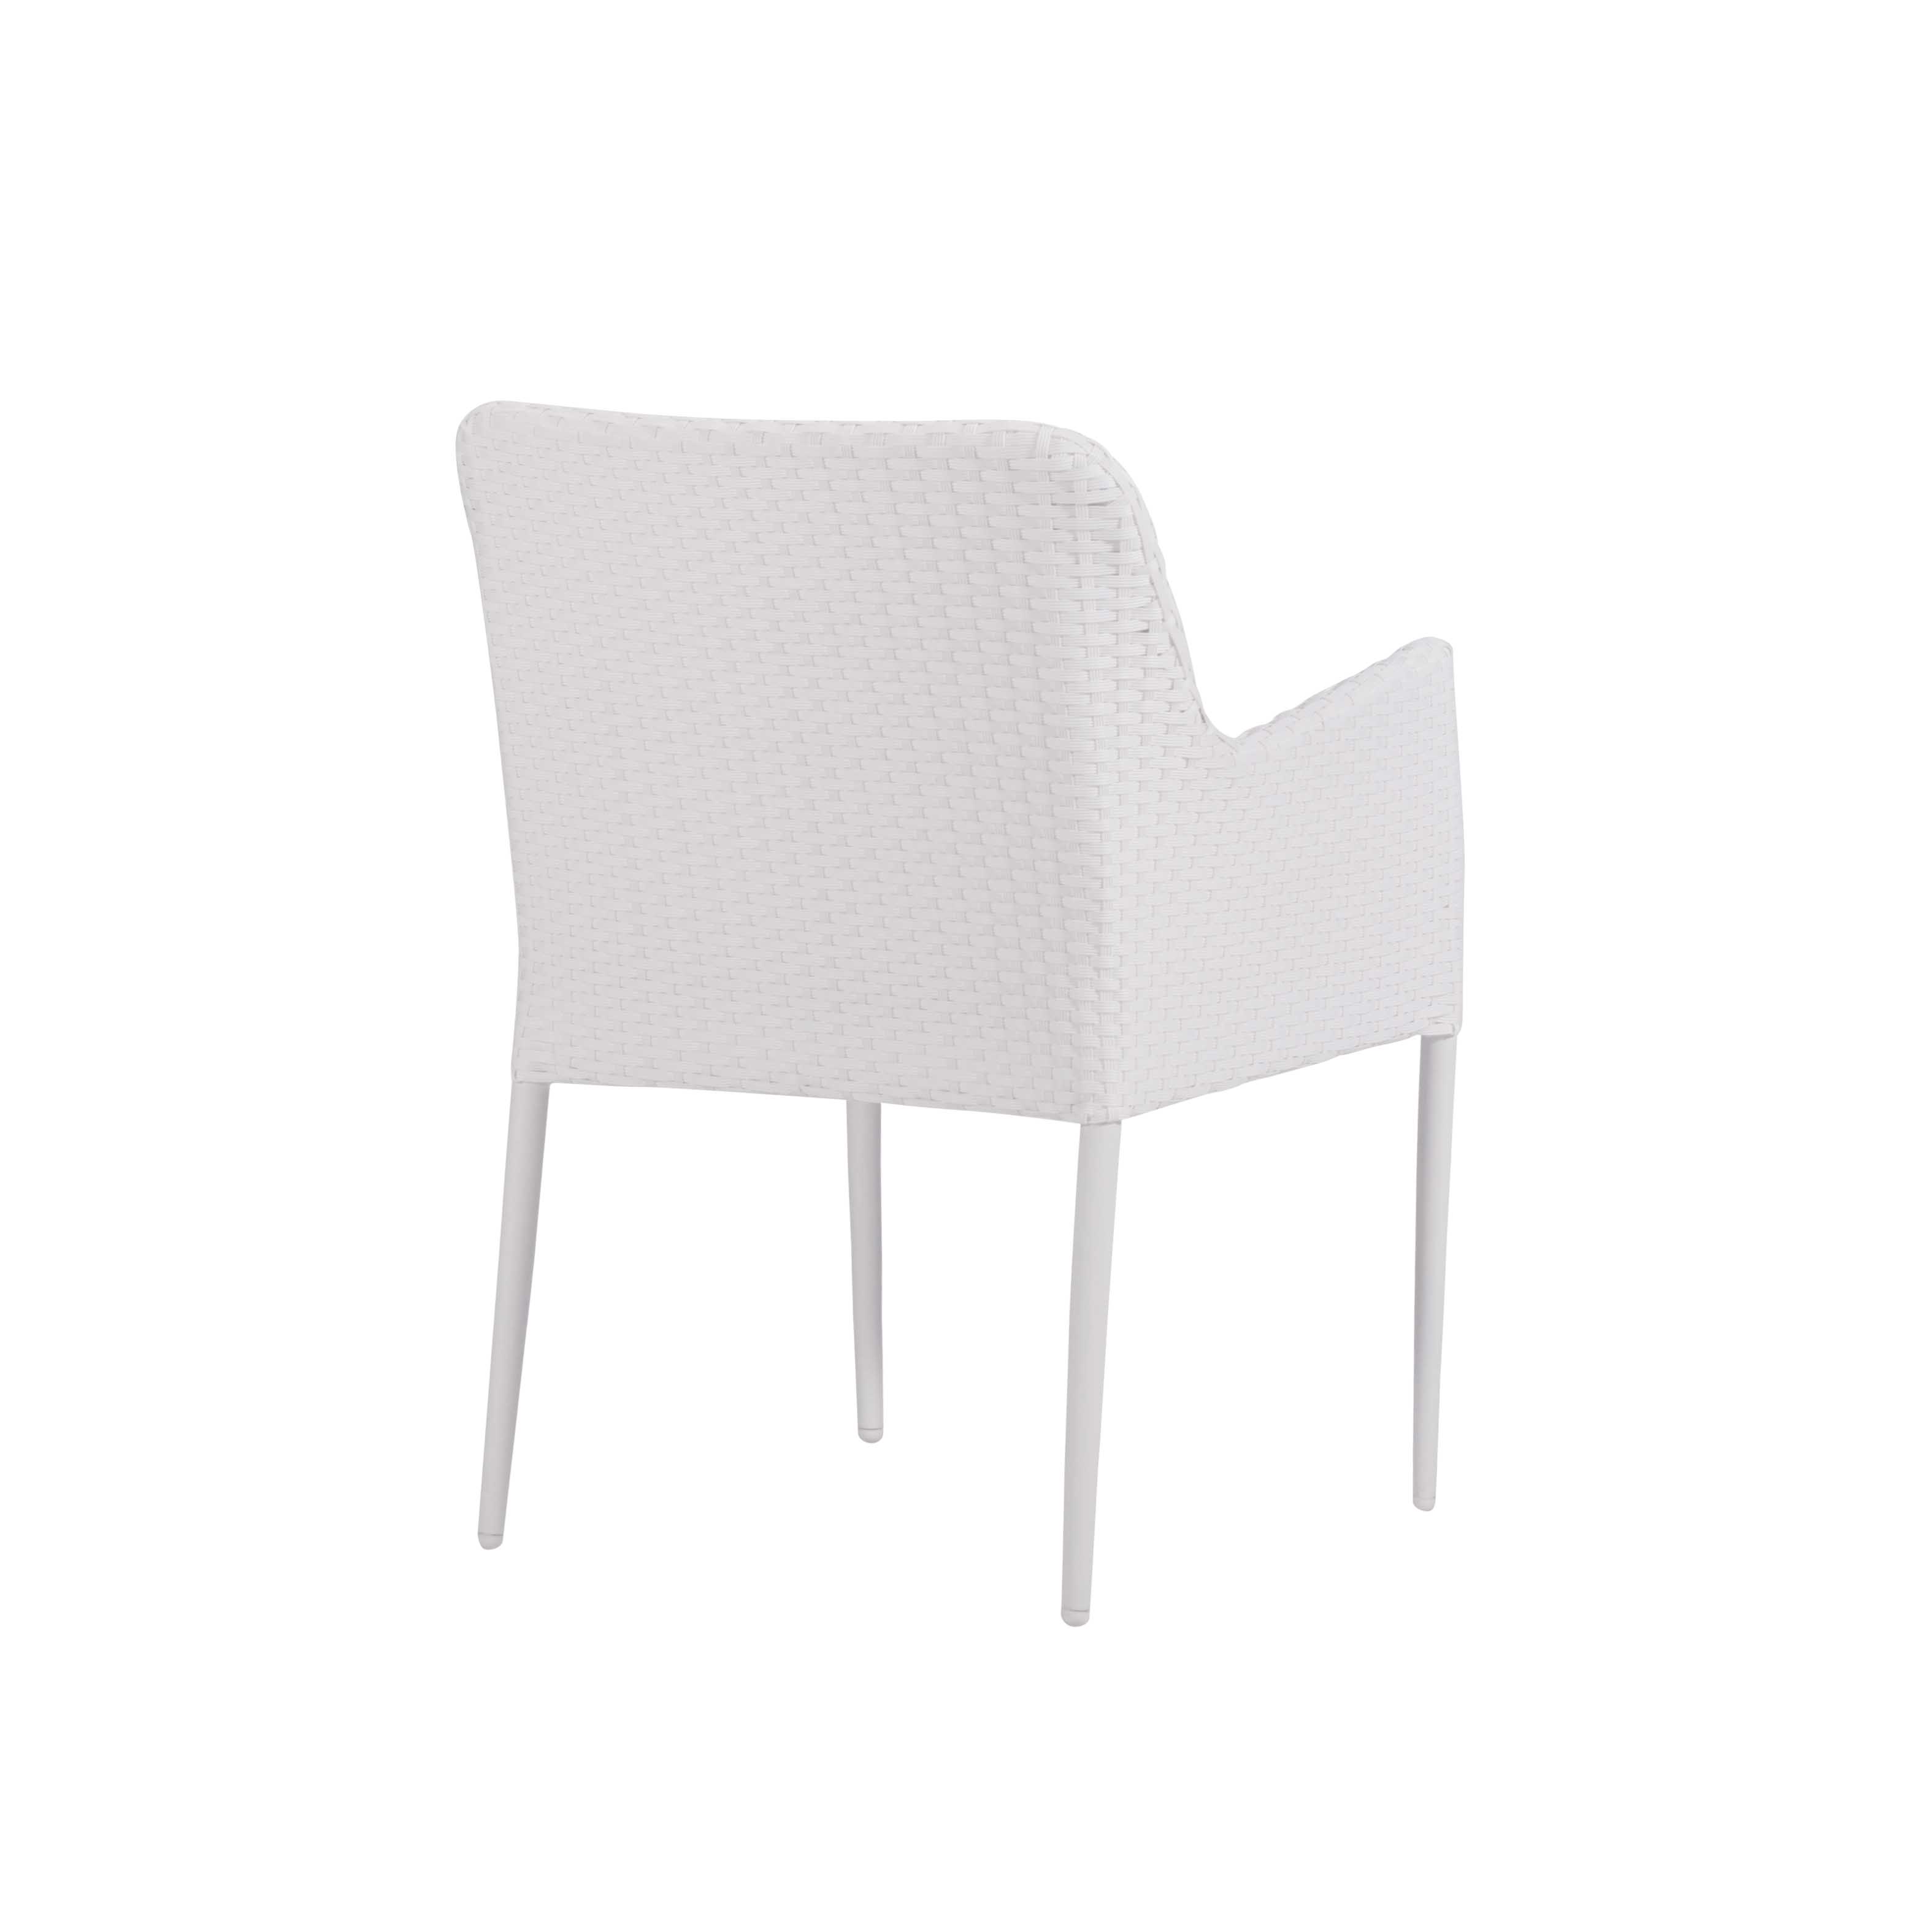 Molly rattan dining chair S4